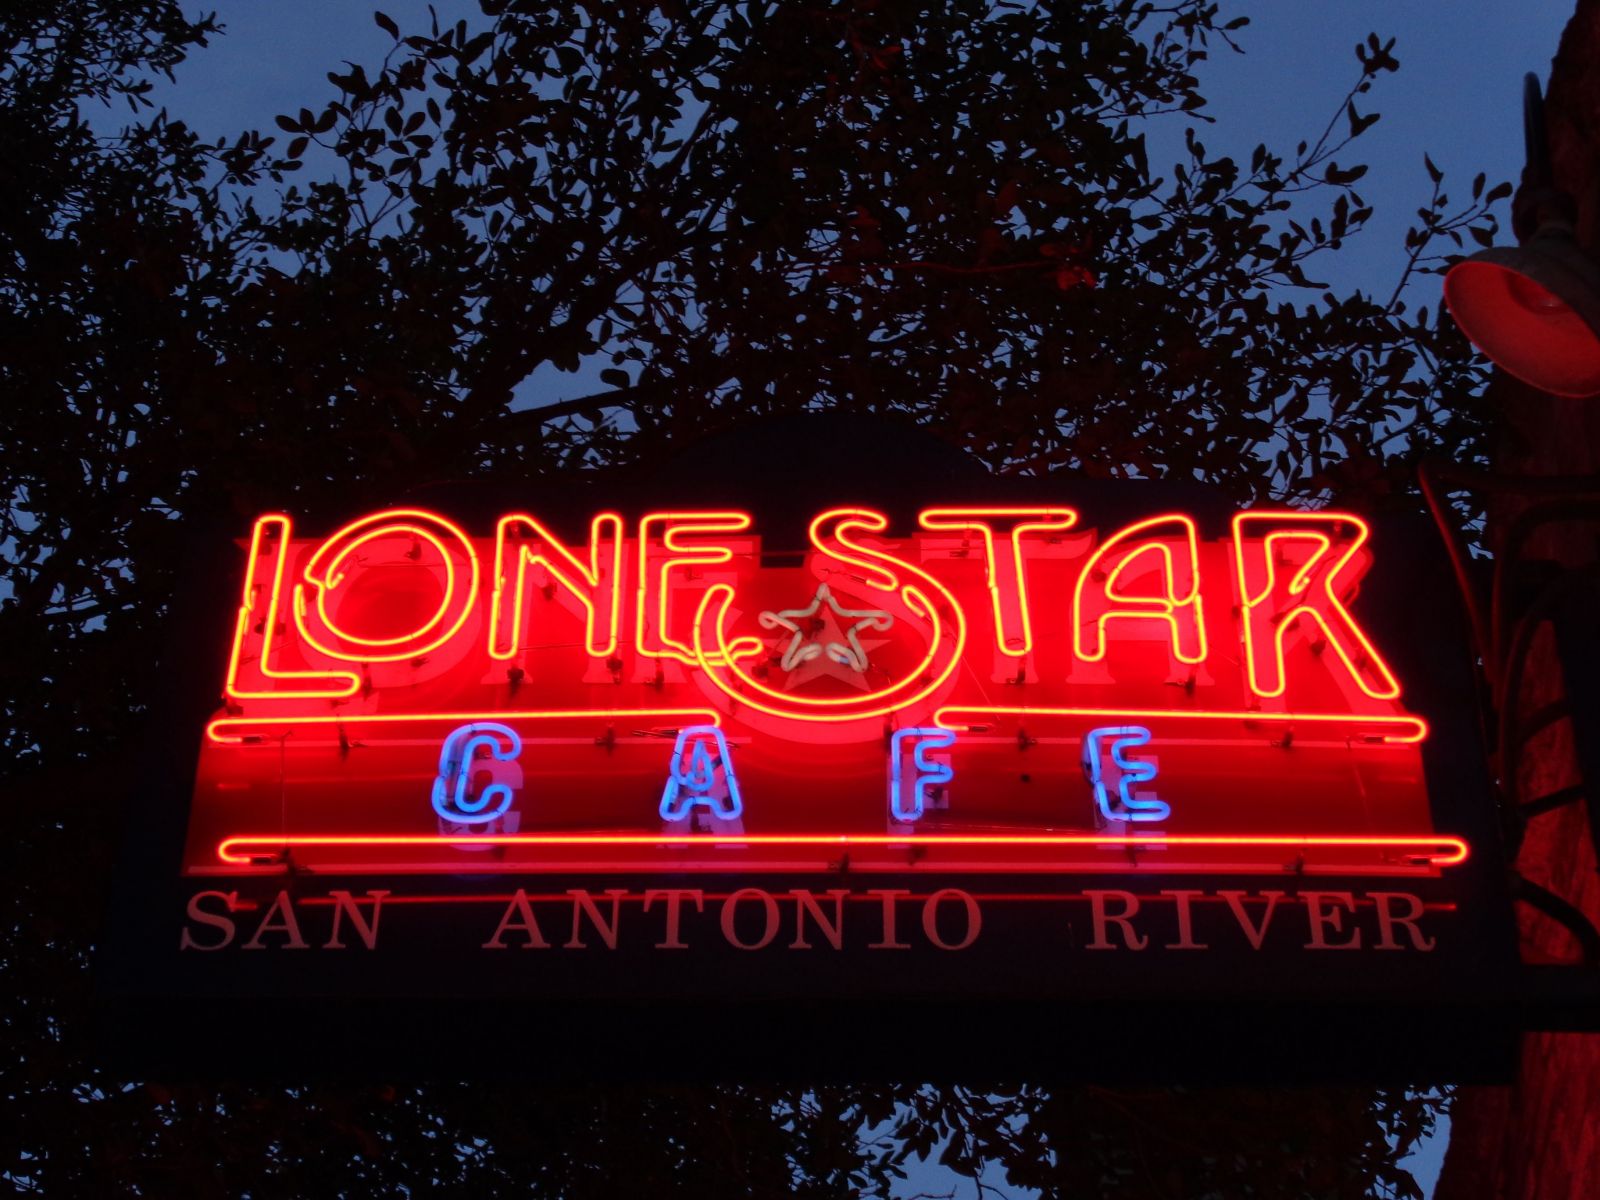 The neon sign for The Lone Star shines brightly against a back-drop of dark, and poorly illuminated foliage